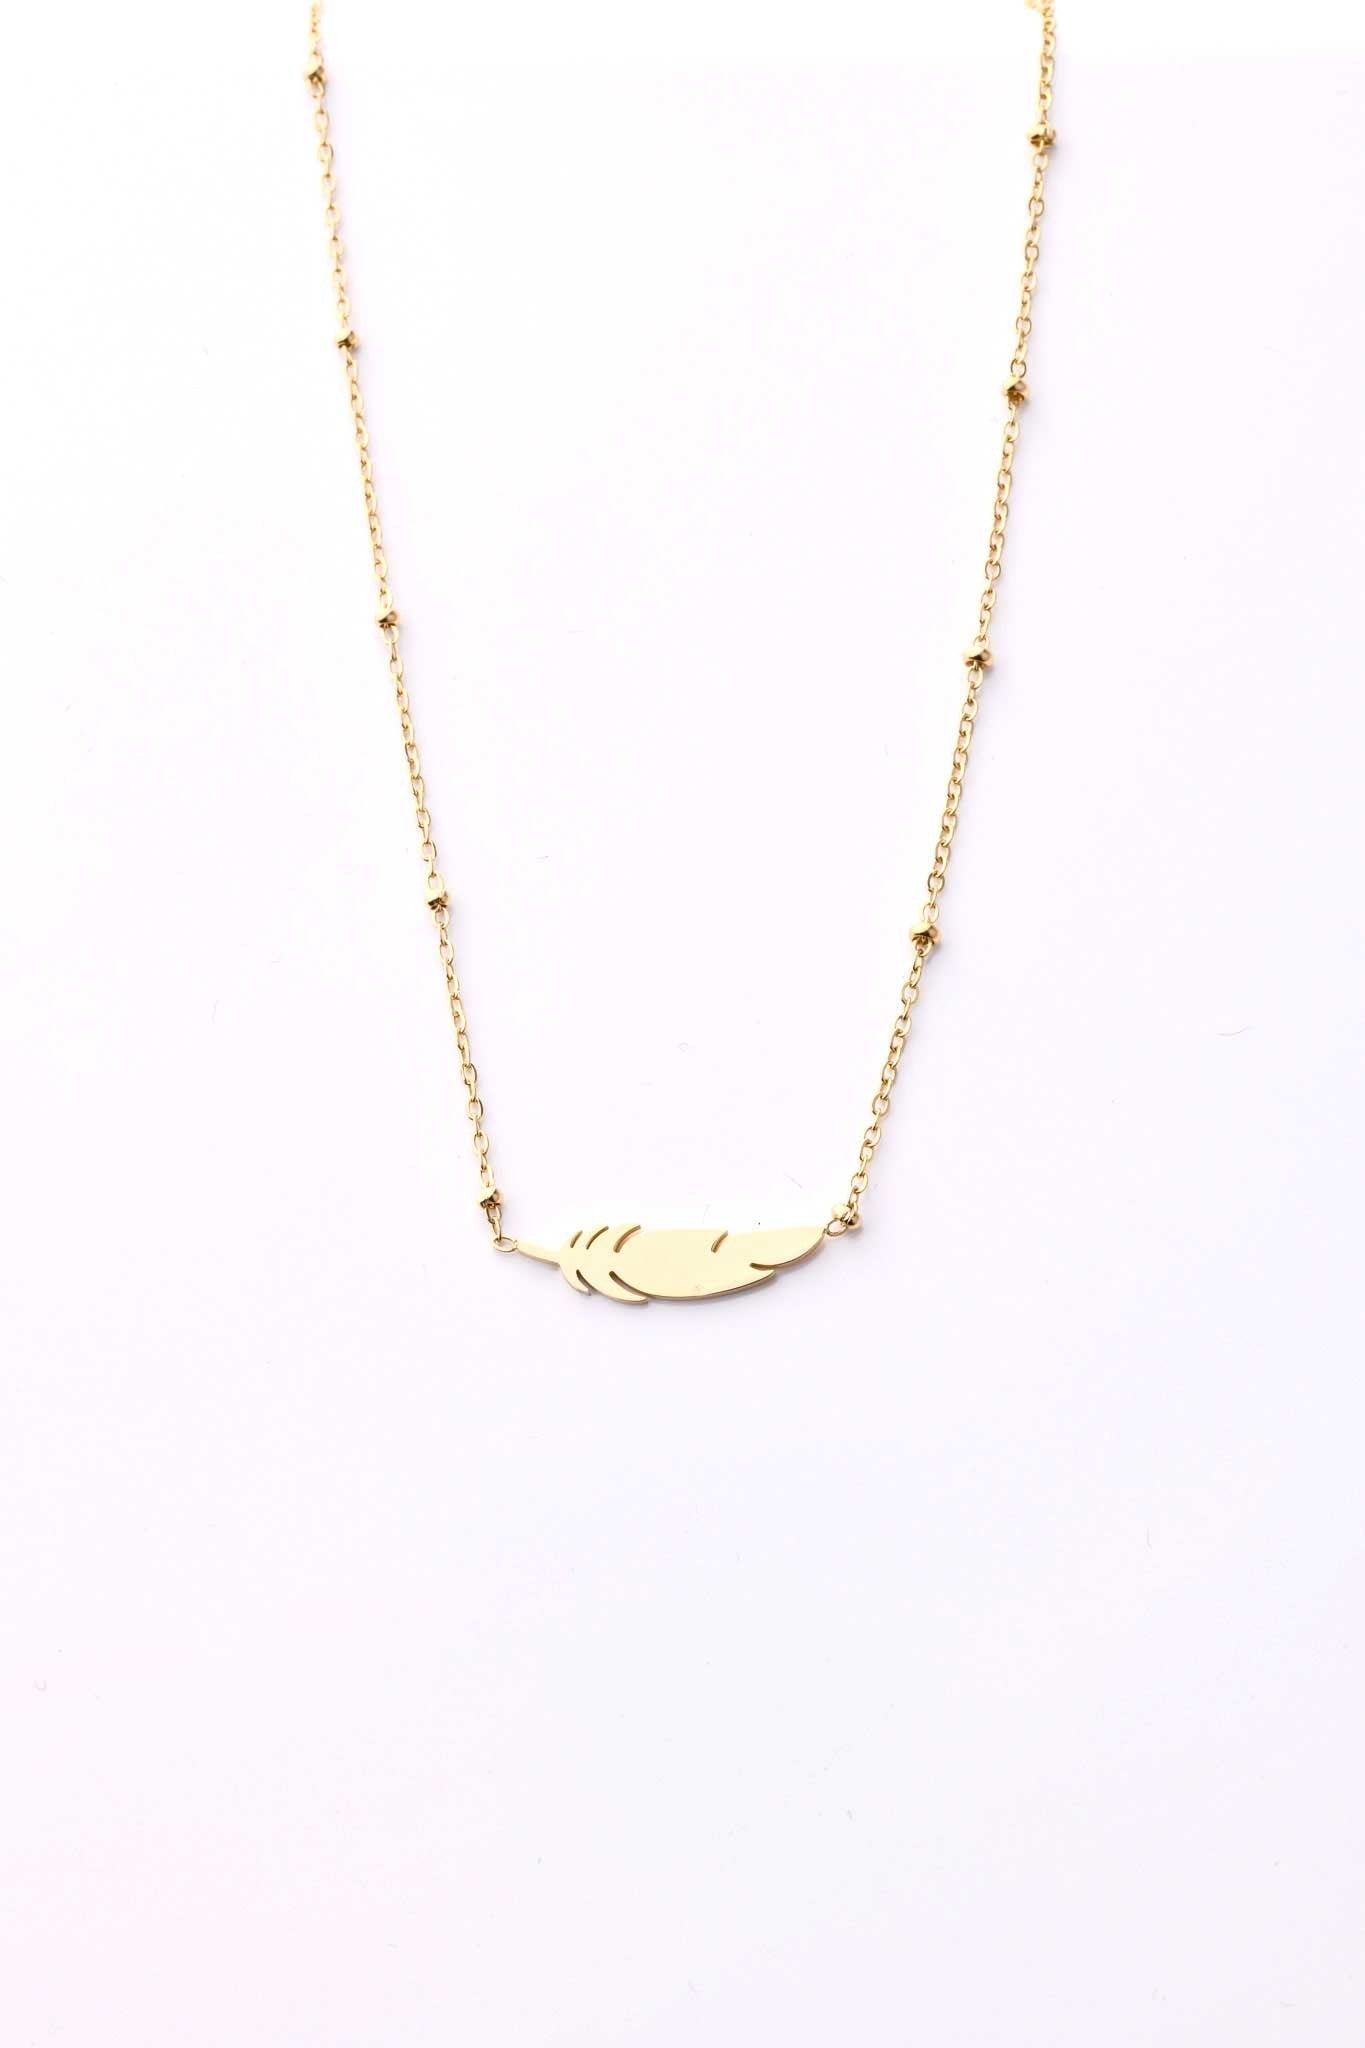 14k Gold Plated Necklace with Feather and Small Gold Beads